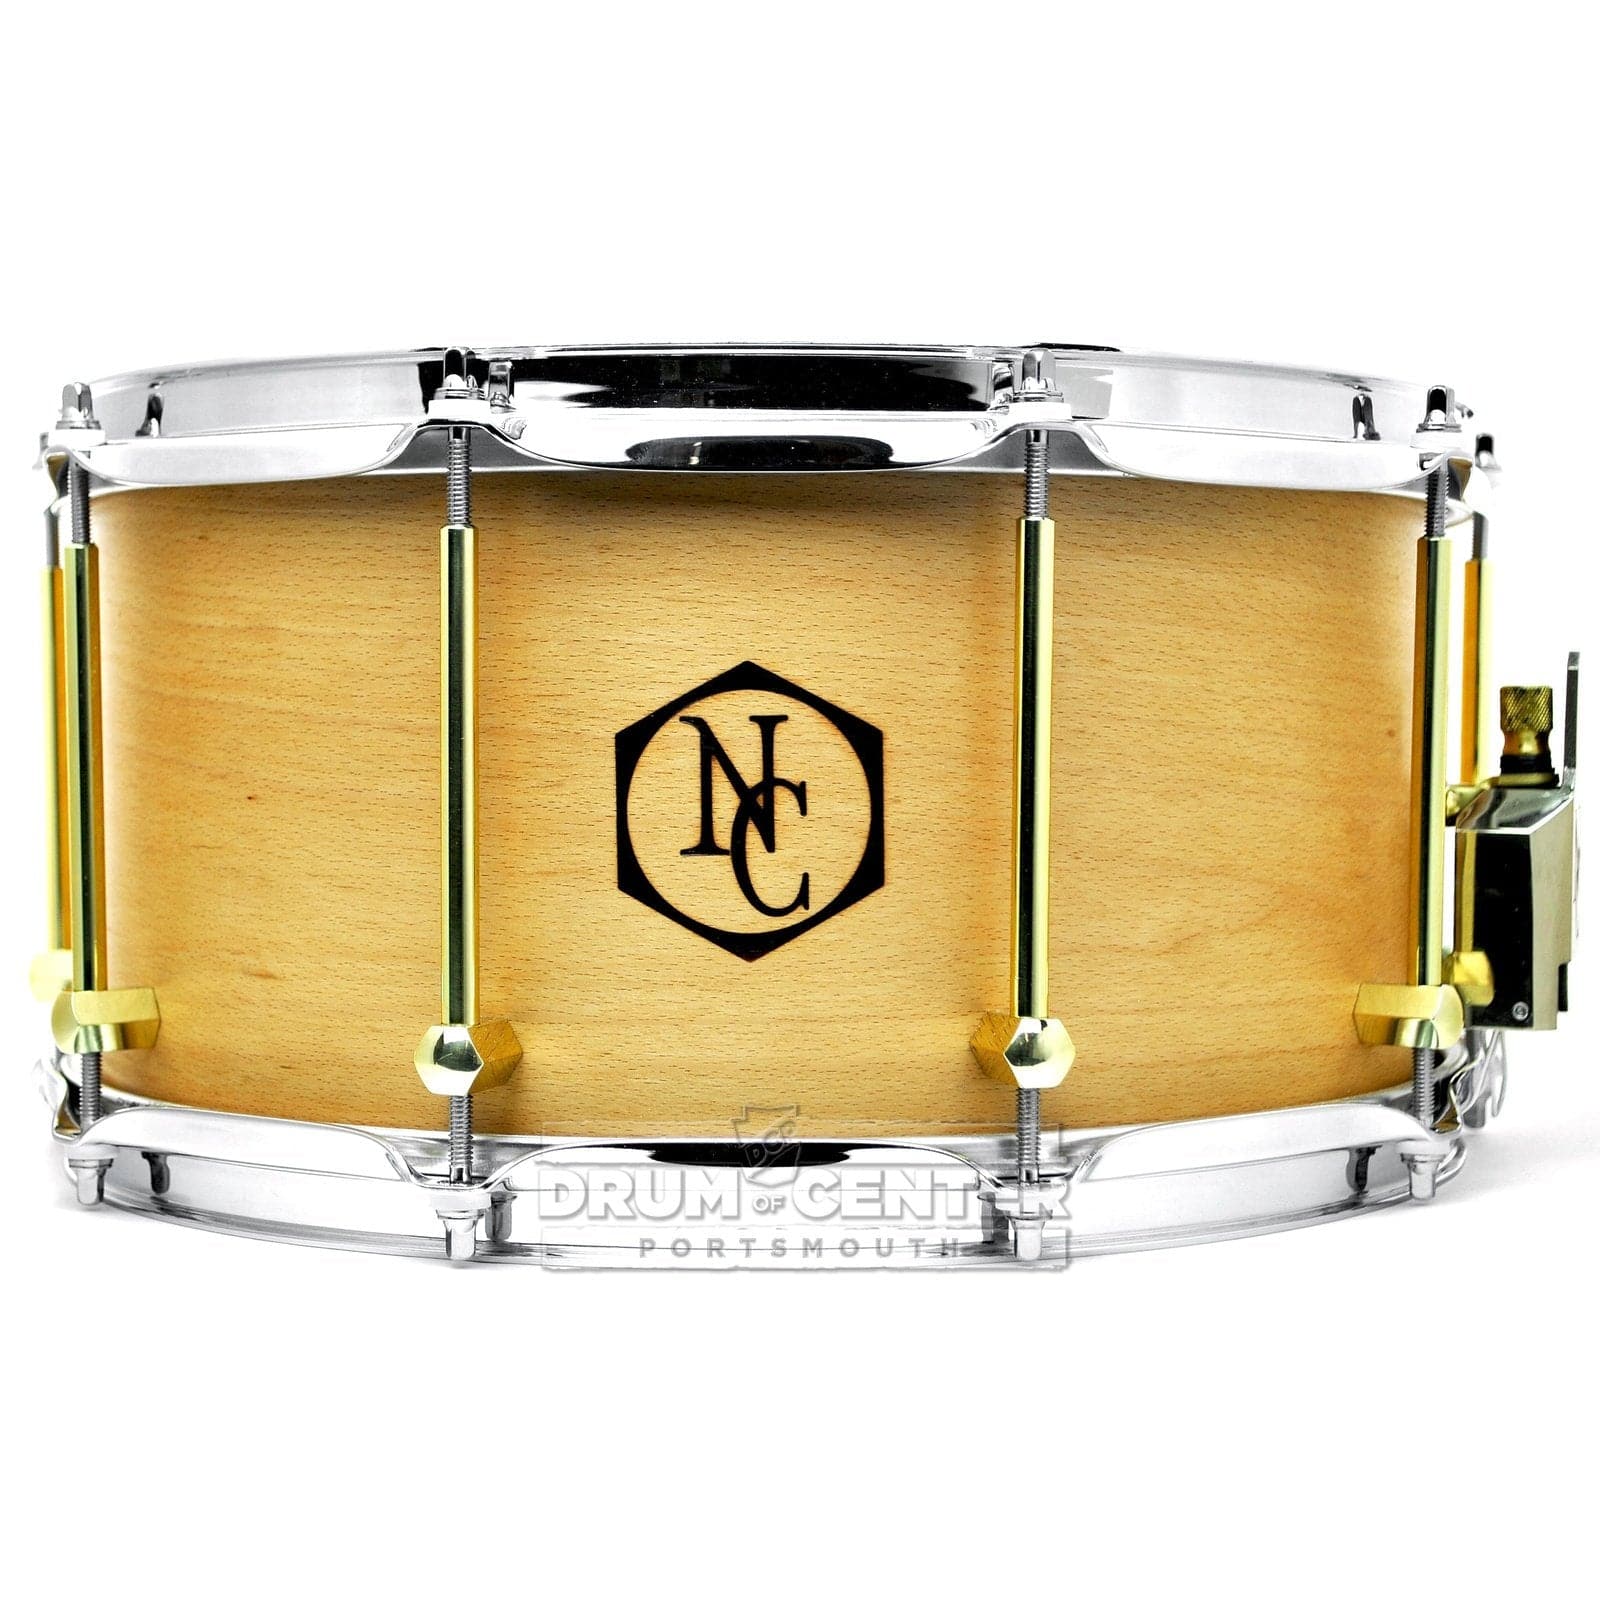 Noble and Cooley 14x7ドラム - www.ferrariadvogados.com